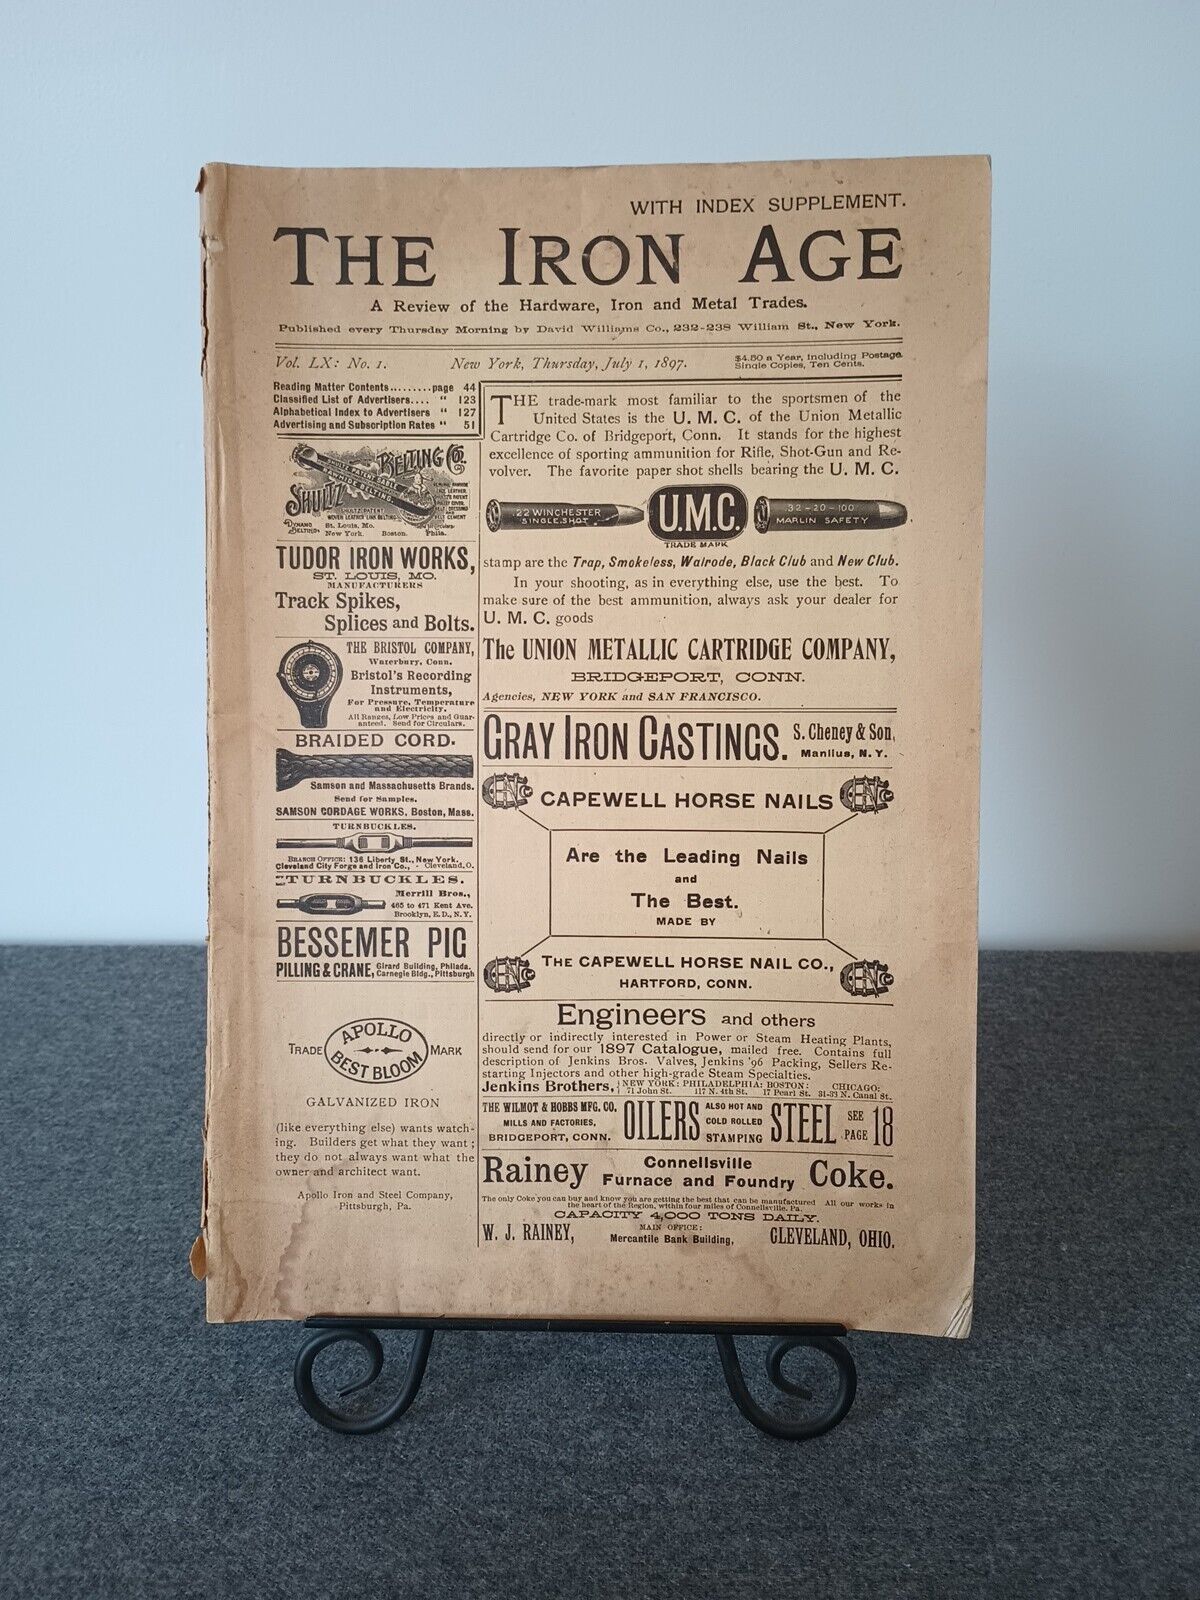 1897 THE IRON AGE Hardware Iron And Metal Trades Review David Williams New York